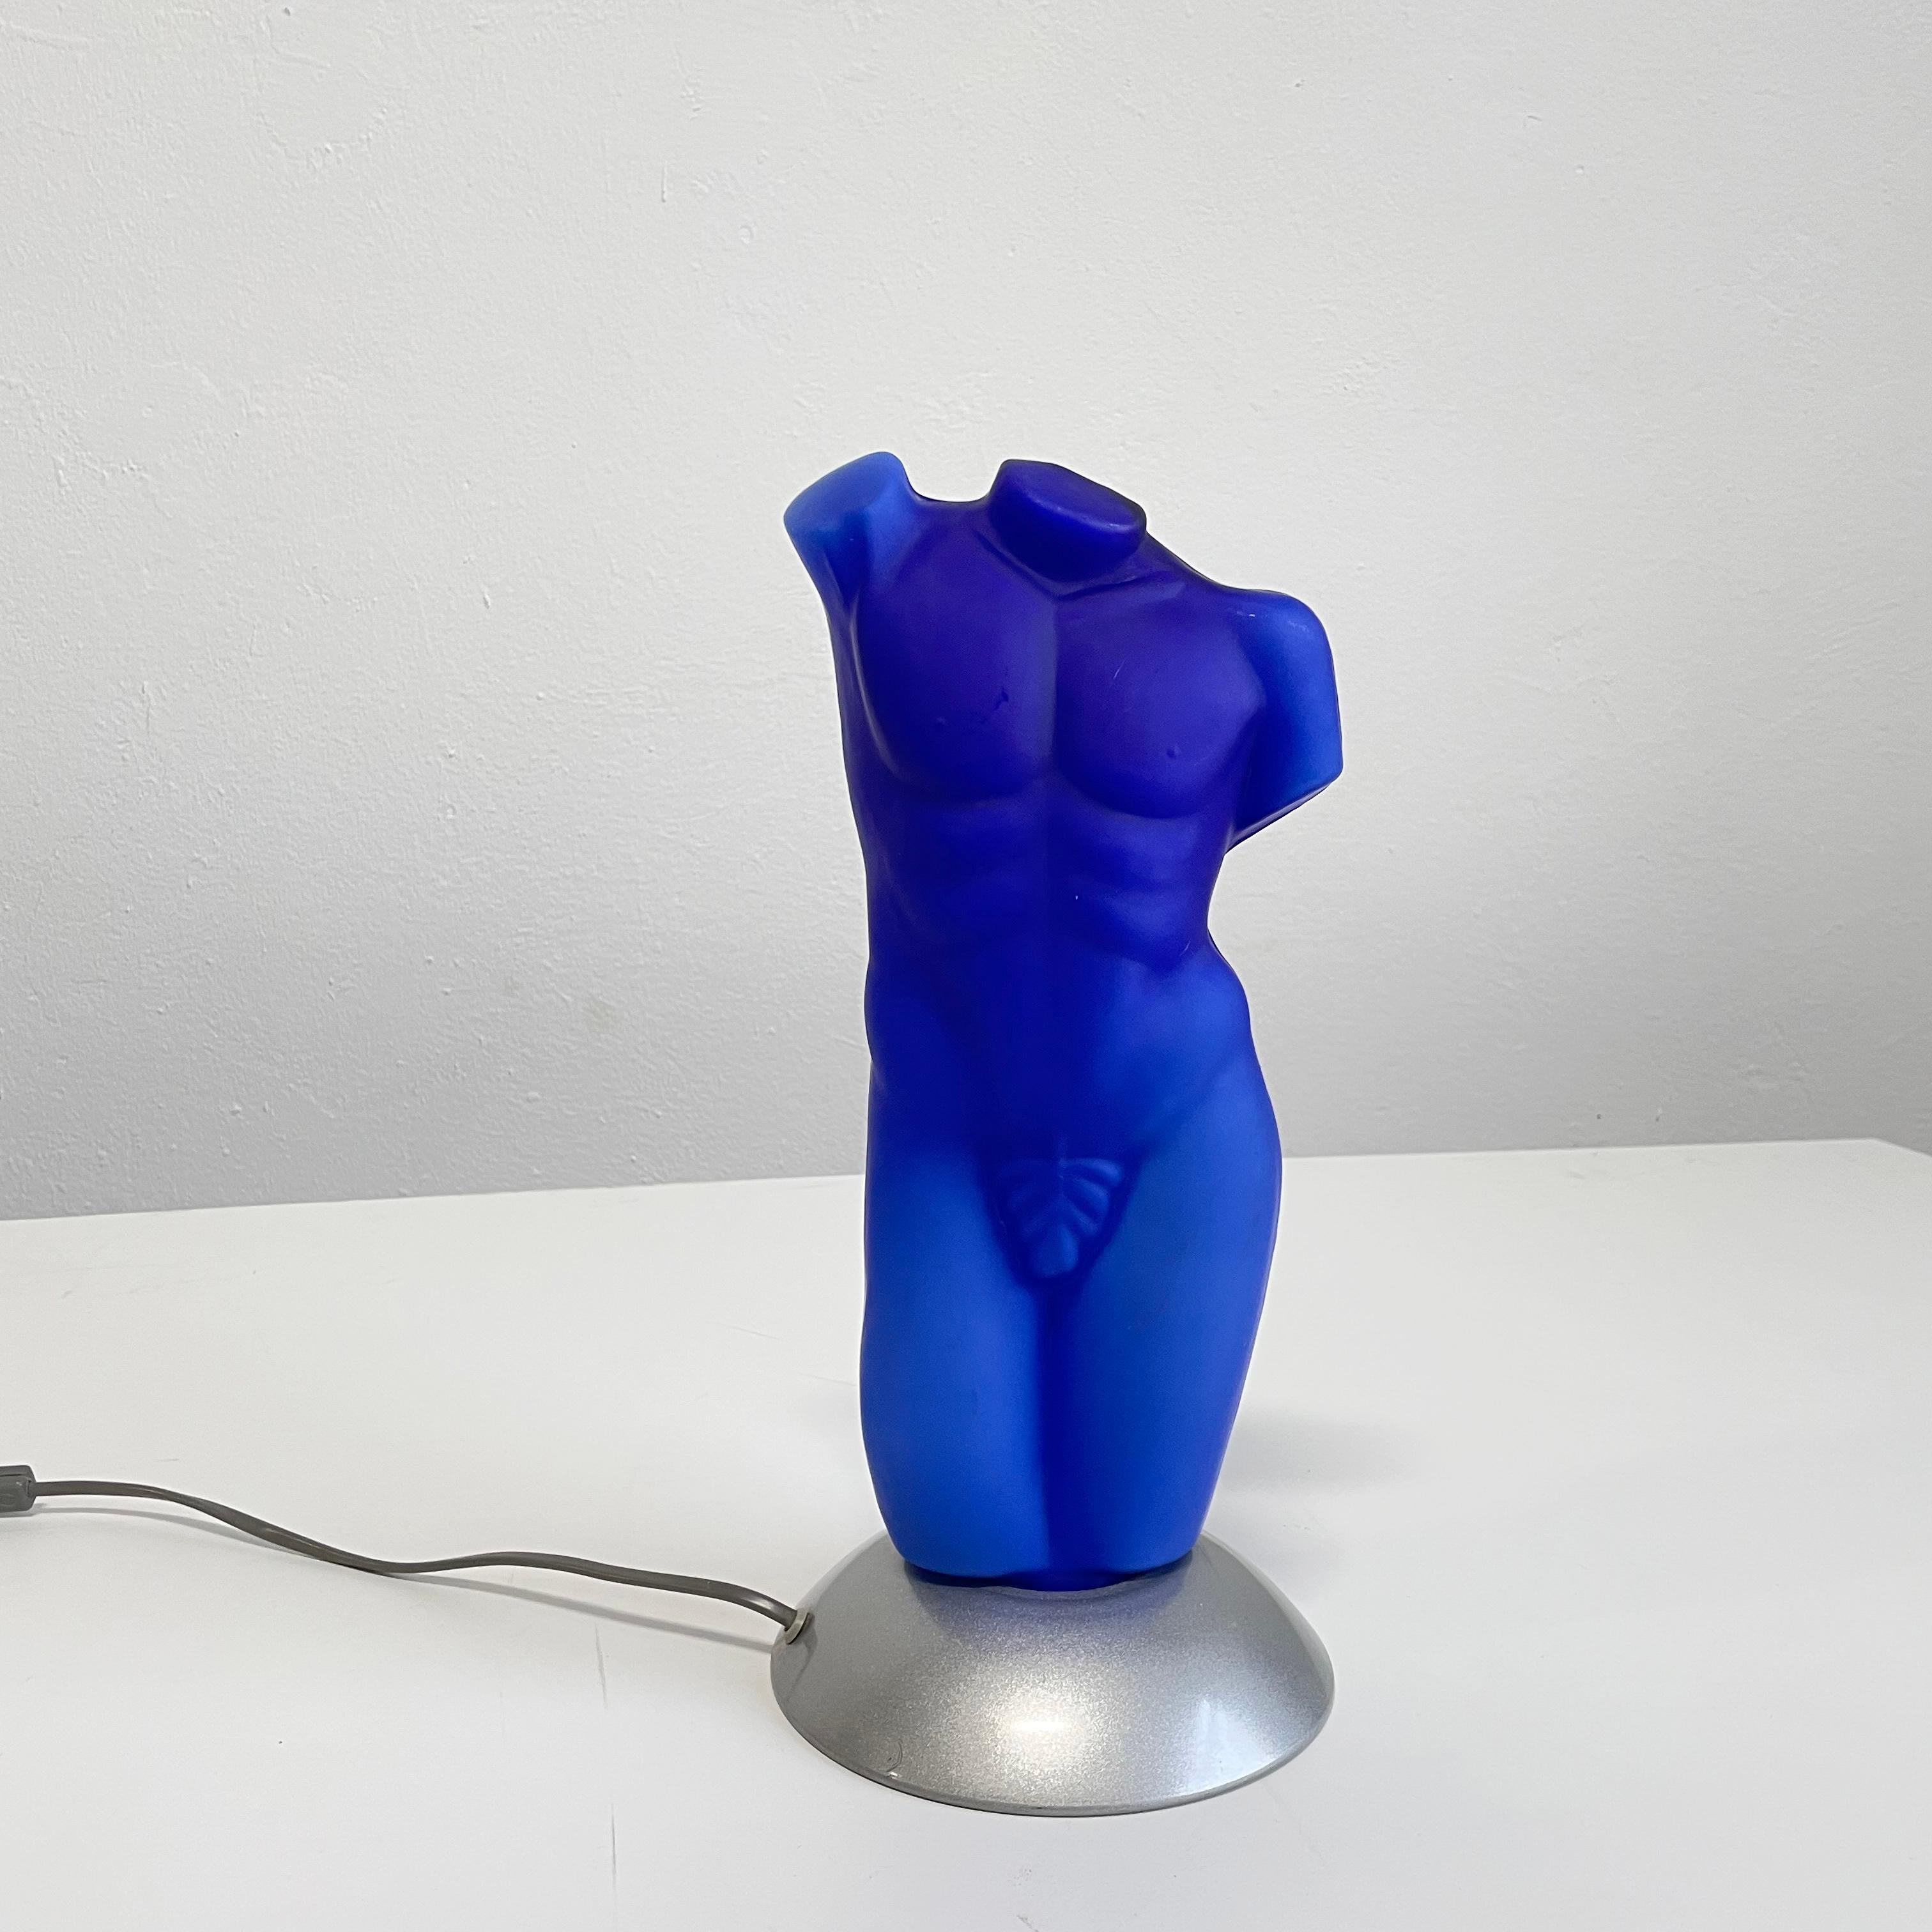 20th Century Post Modern Italian Male Torso Table Lamp in Frosted Blue Glass, Sculptural Lamp